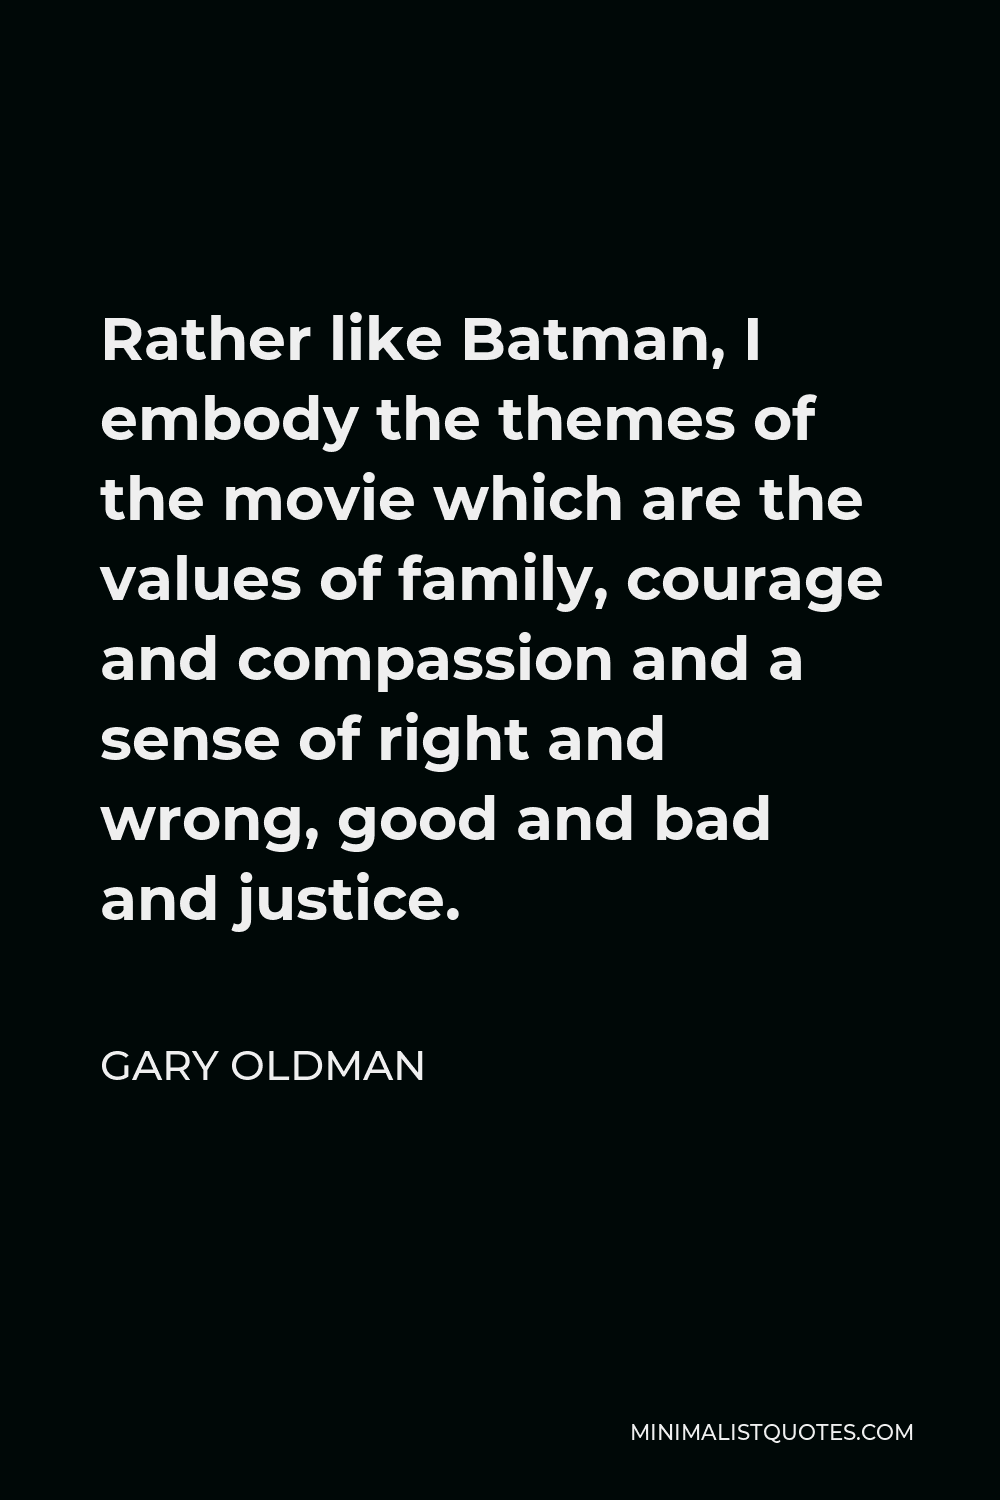 Gary Oldman Quote - Rather like Batman, I embody the themes of the movie which are the values of family, courage and compassion and a sense of right and wrong, good and bad and justice.